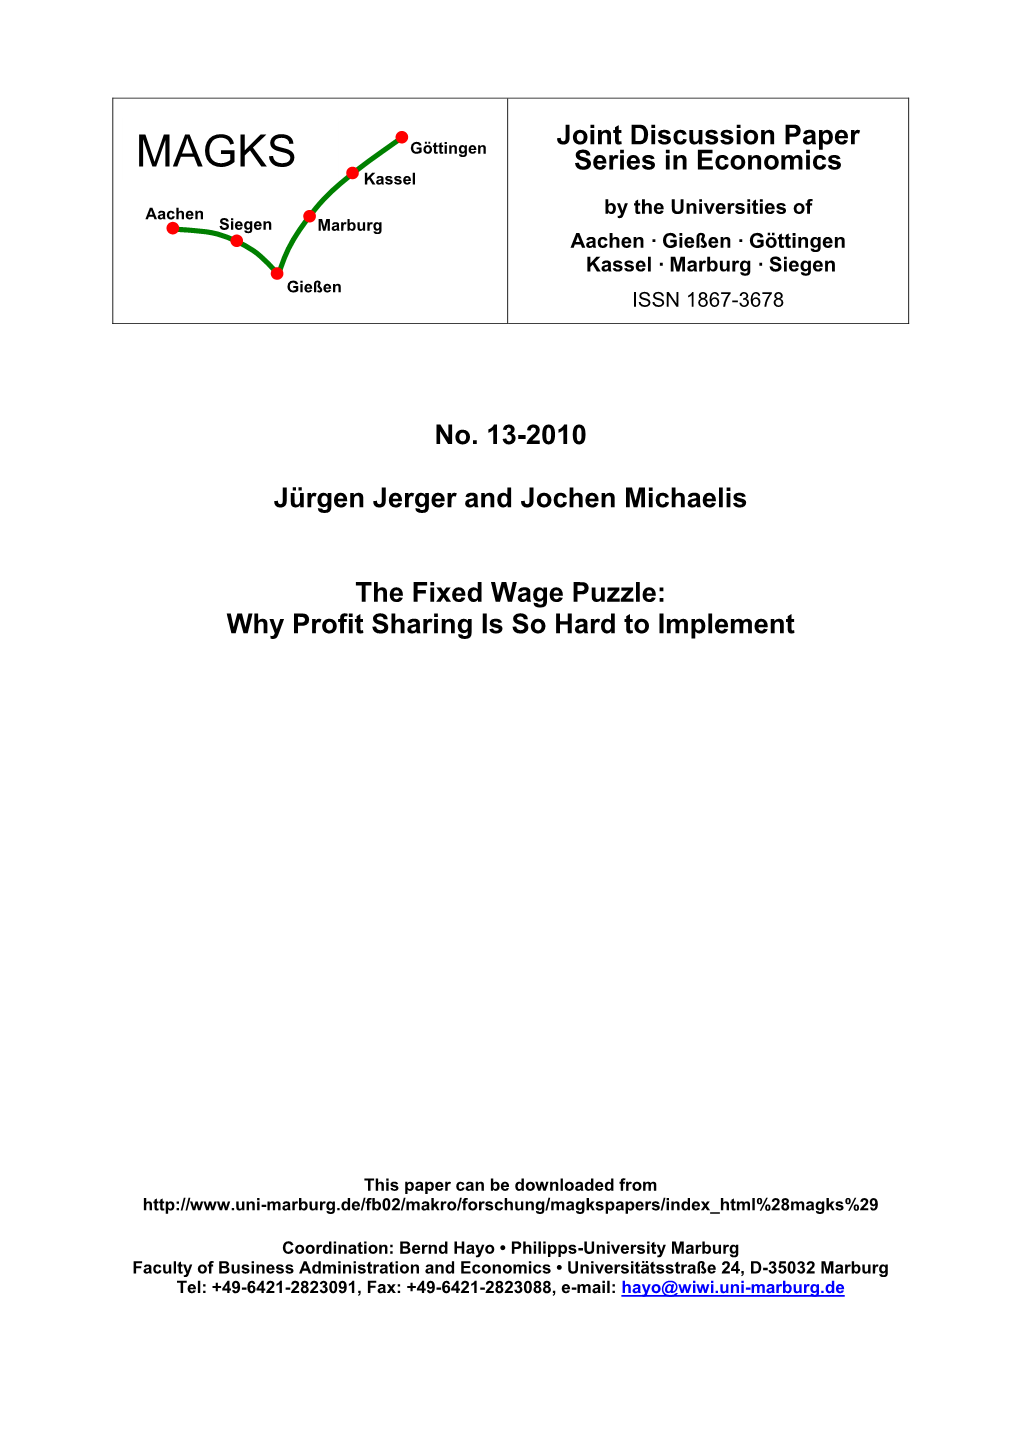 The Fixed Wage Puzzle: Why Profit Sharing Is So Hard to Implement